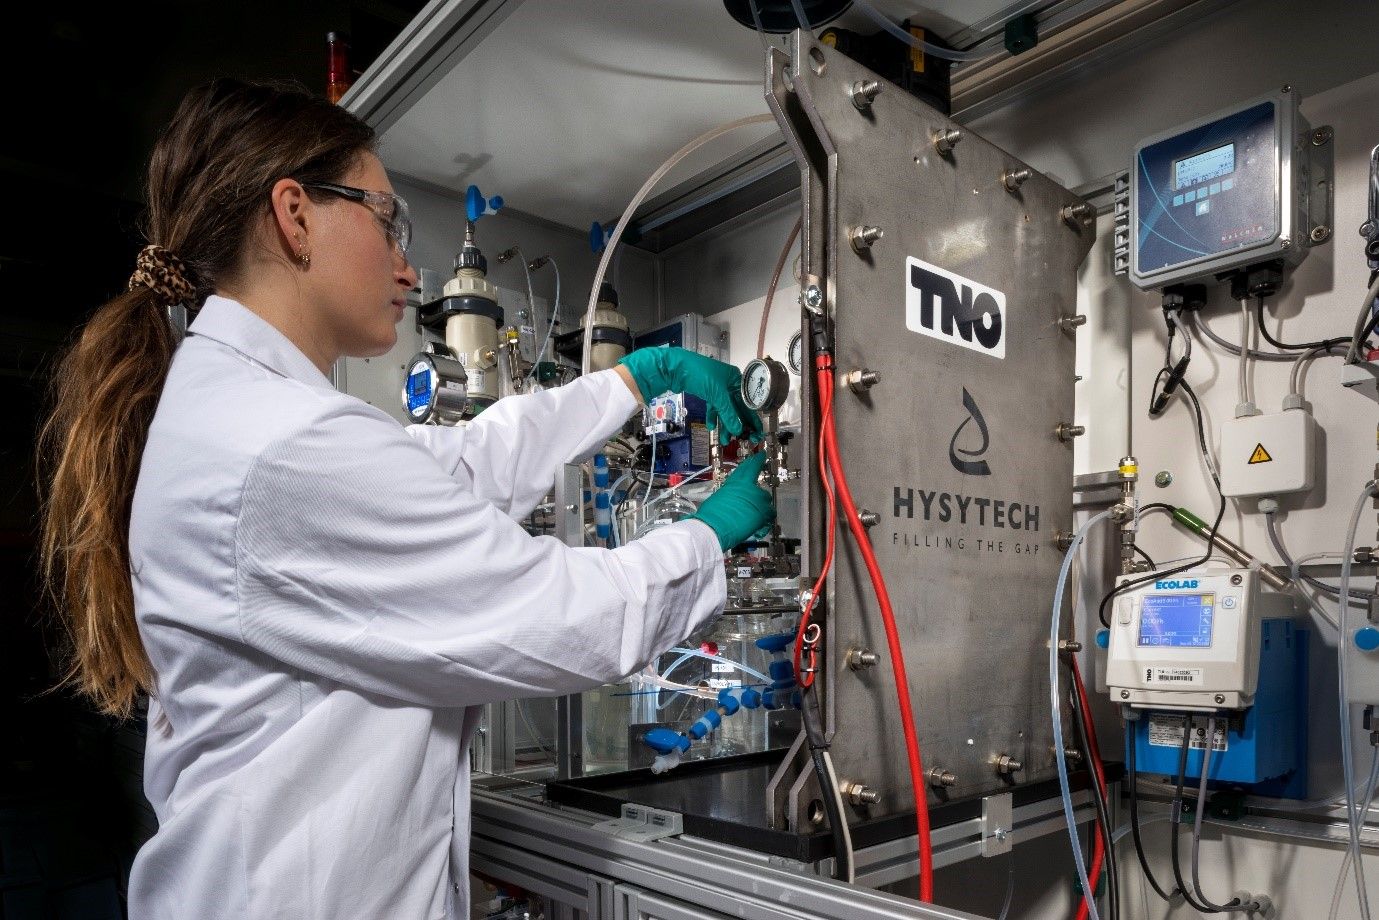 Ambient electrolysis test station and Demeter-1 electrochemical filter press type flow reactor for electrochemical conversion of biobased chemicals ©TNO